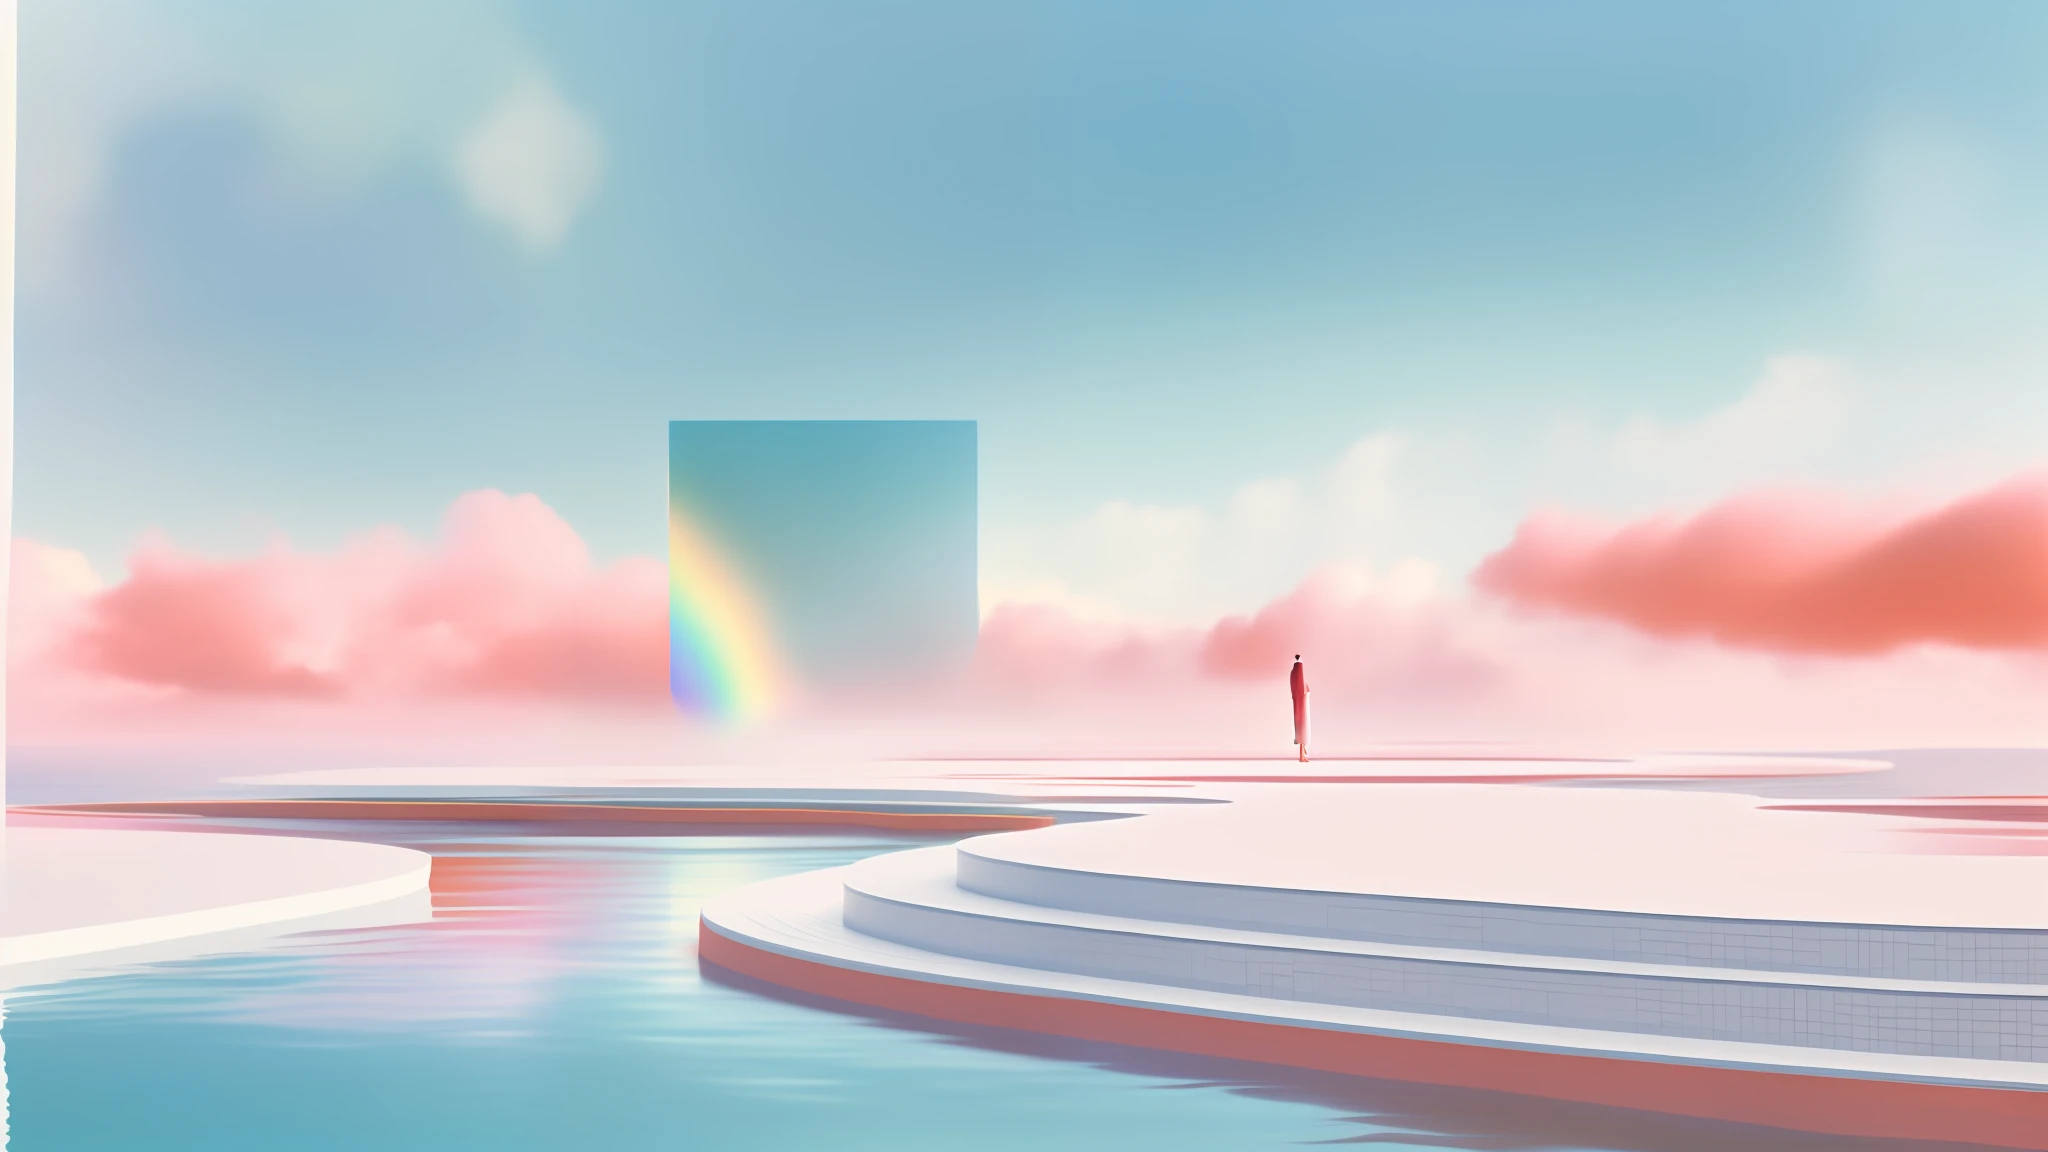 there is a man standing on a platform in a pool, colorful flat surreal ethereal, in a surreal dream landscape, a surreal dream landscape, surreal 3 d render, surreal background, vaporwave surreal ocean, surreal dream landscape, octane render a  rainbow, blurred and dreamy illustration, surreal dreamscape, surrealism aesthetic, inspired by Mike Winkelmann, dreamlike atmosphere